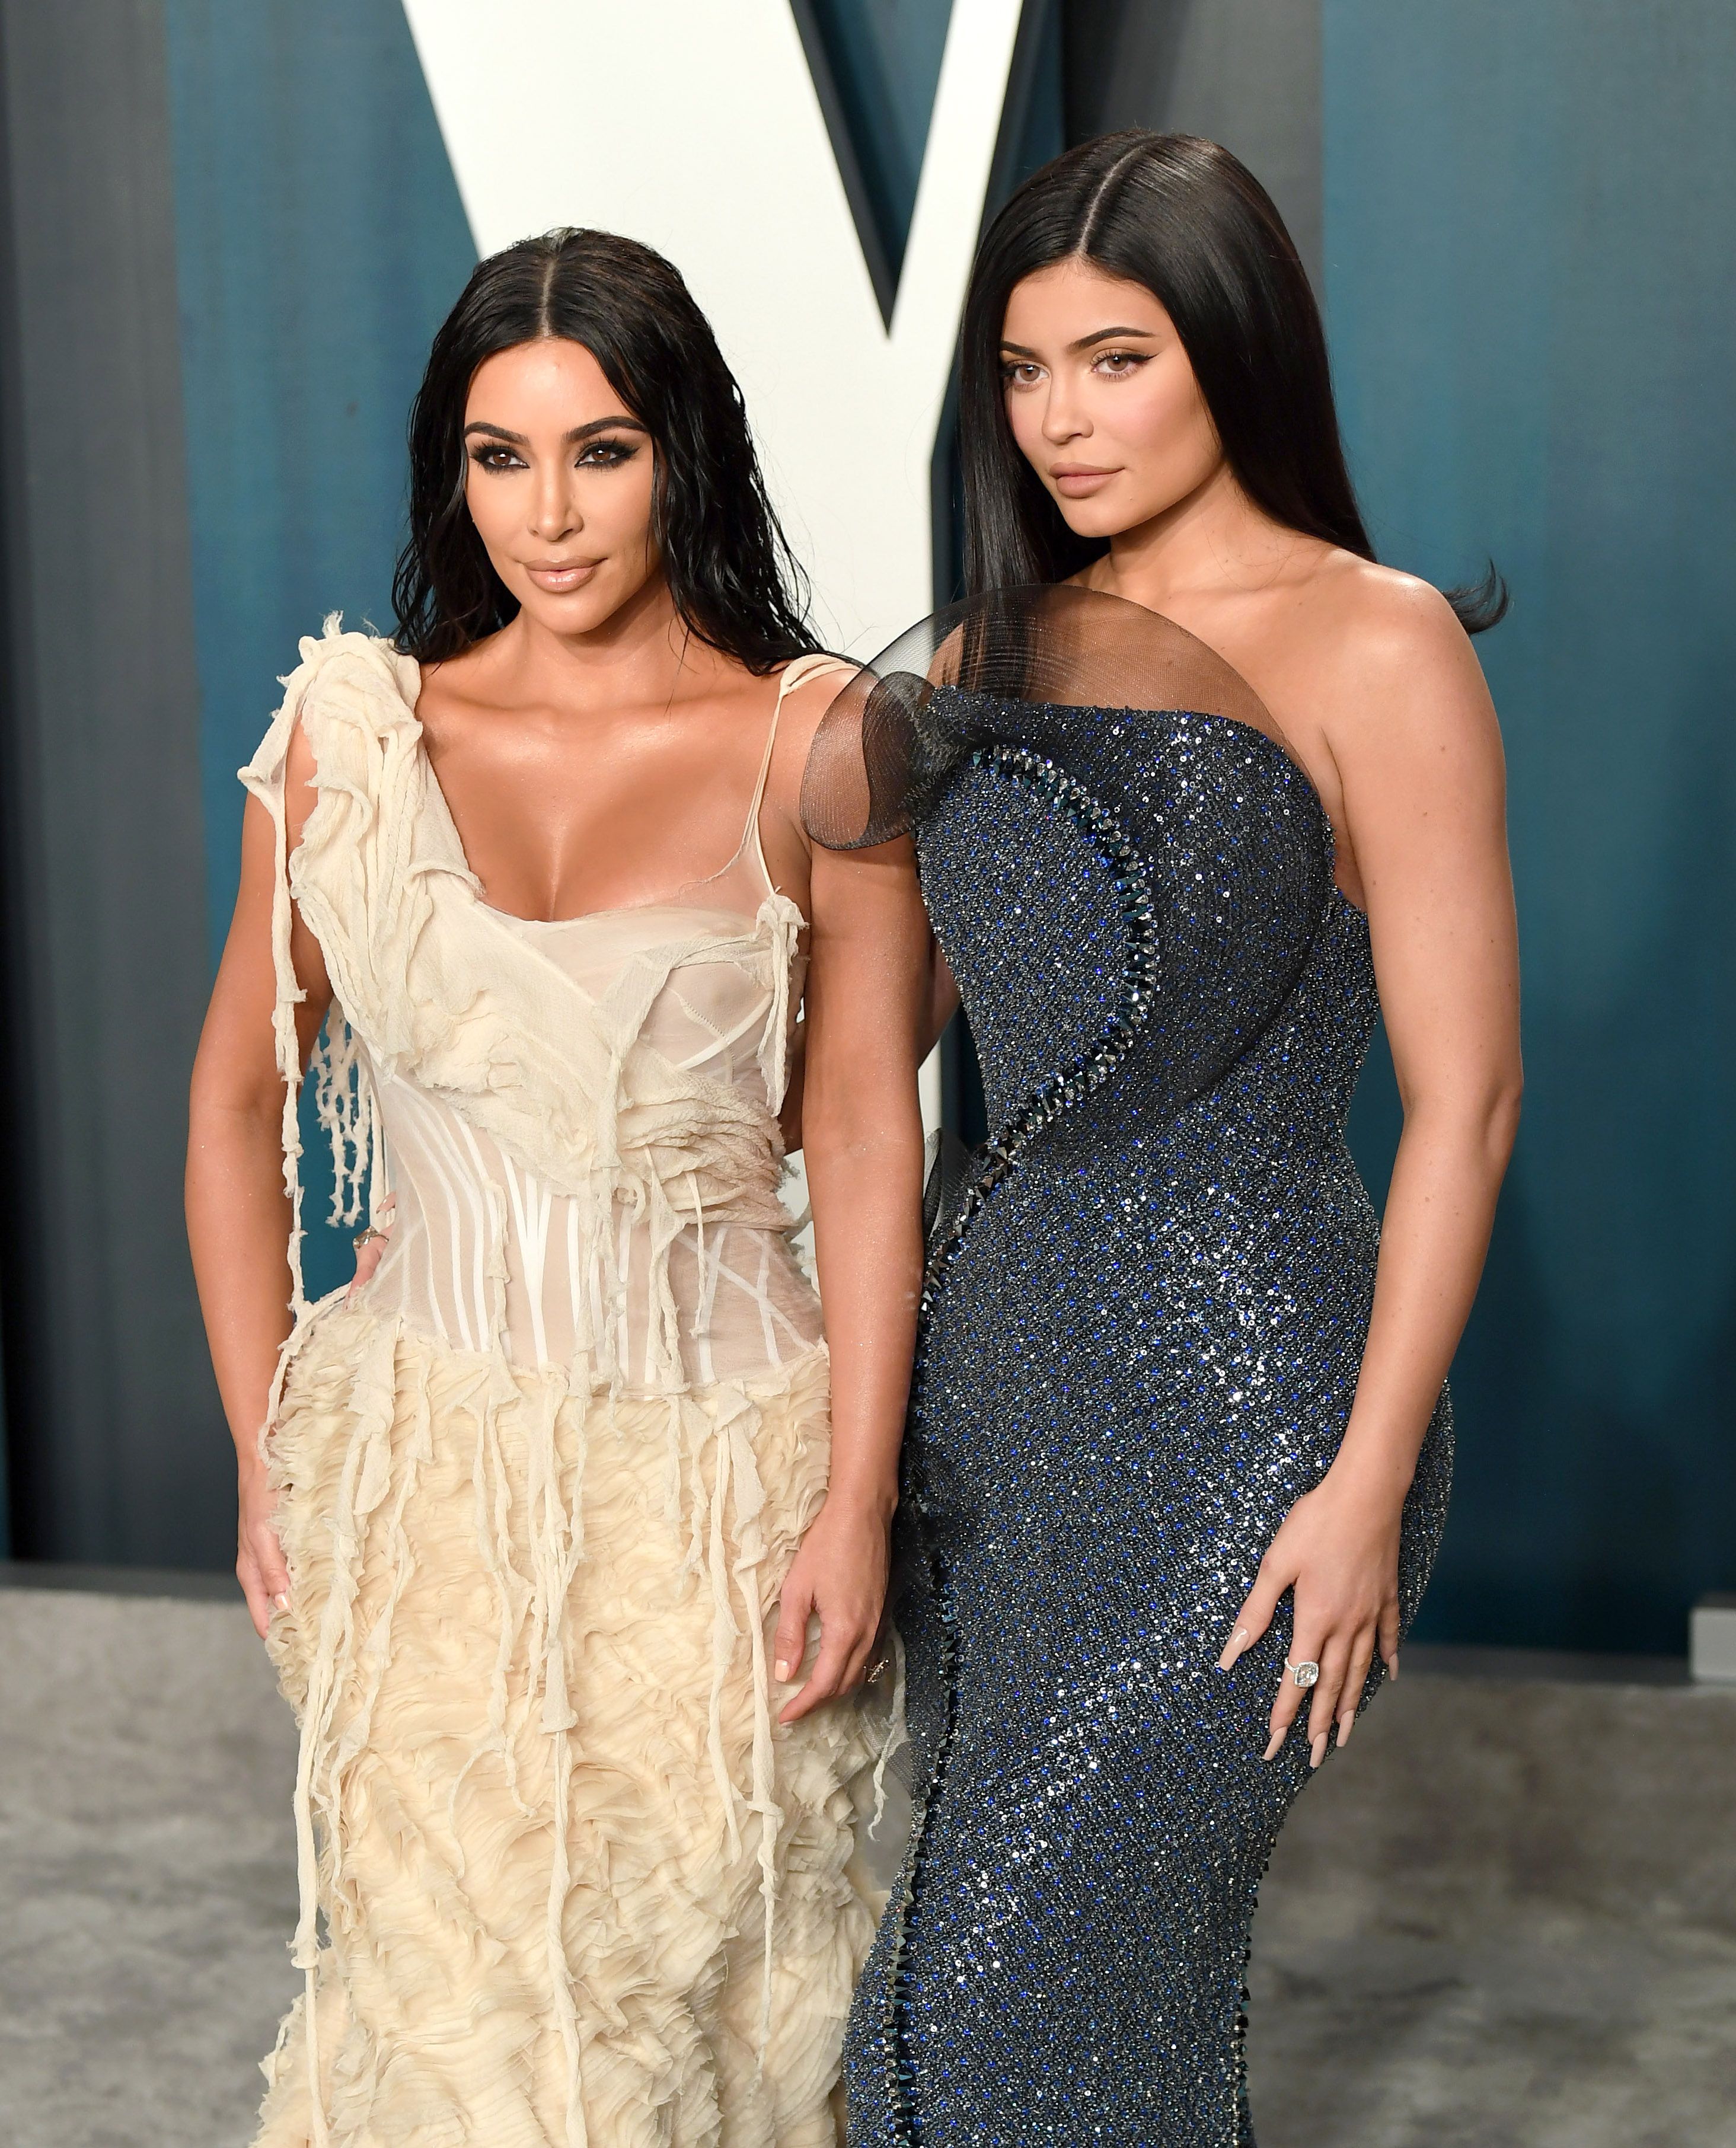 All About The Discussion Of Kim Kardashian And Kylie Jenner Celebrity Gossip News